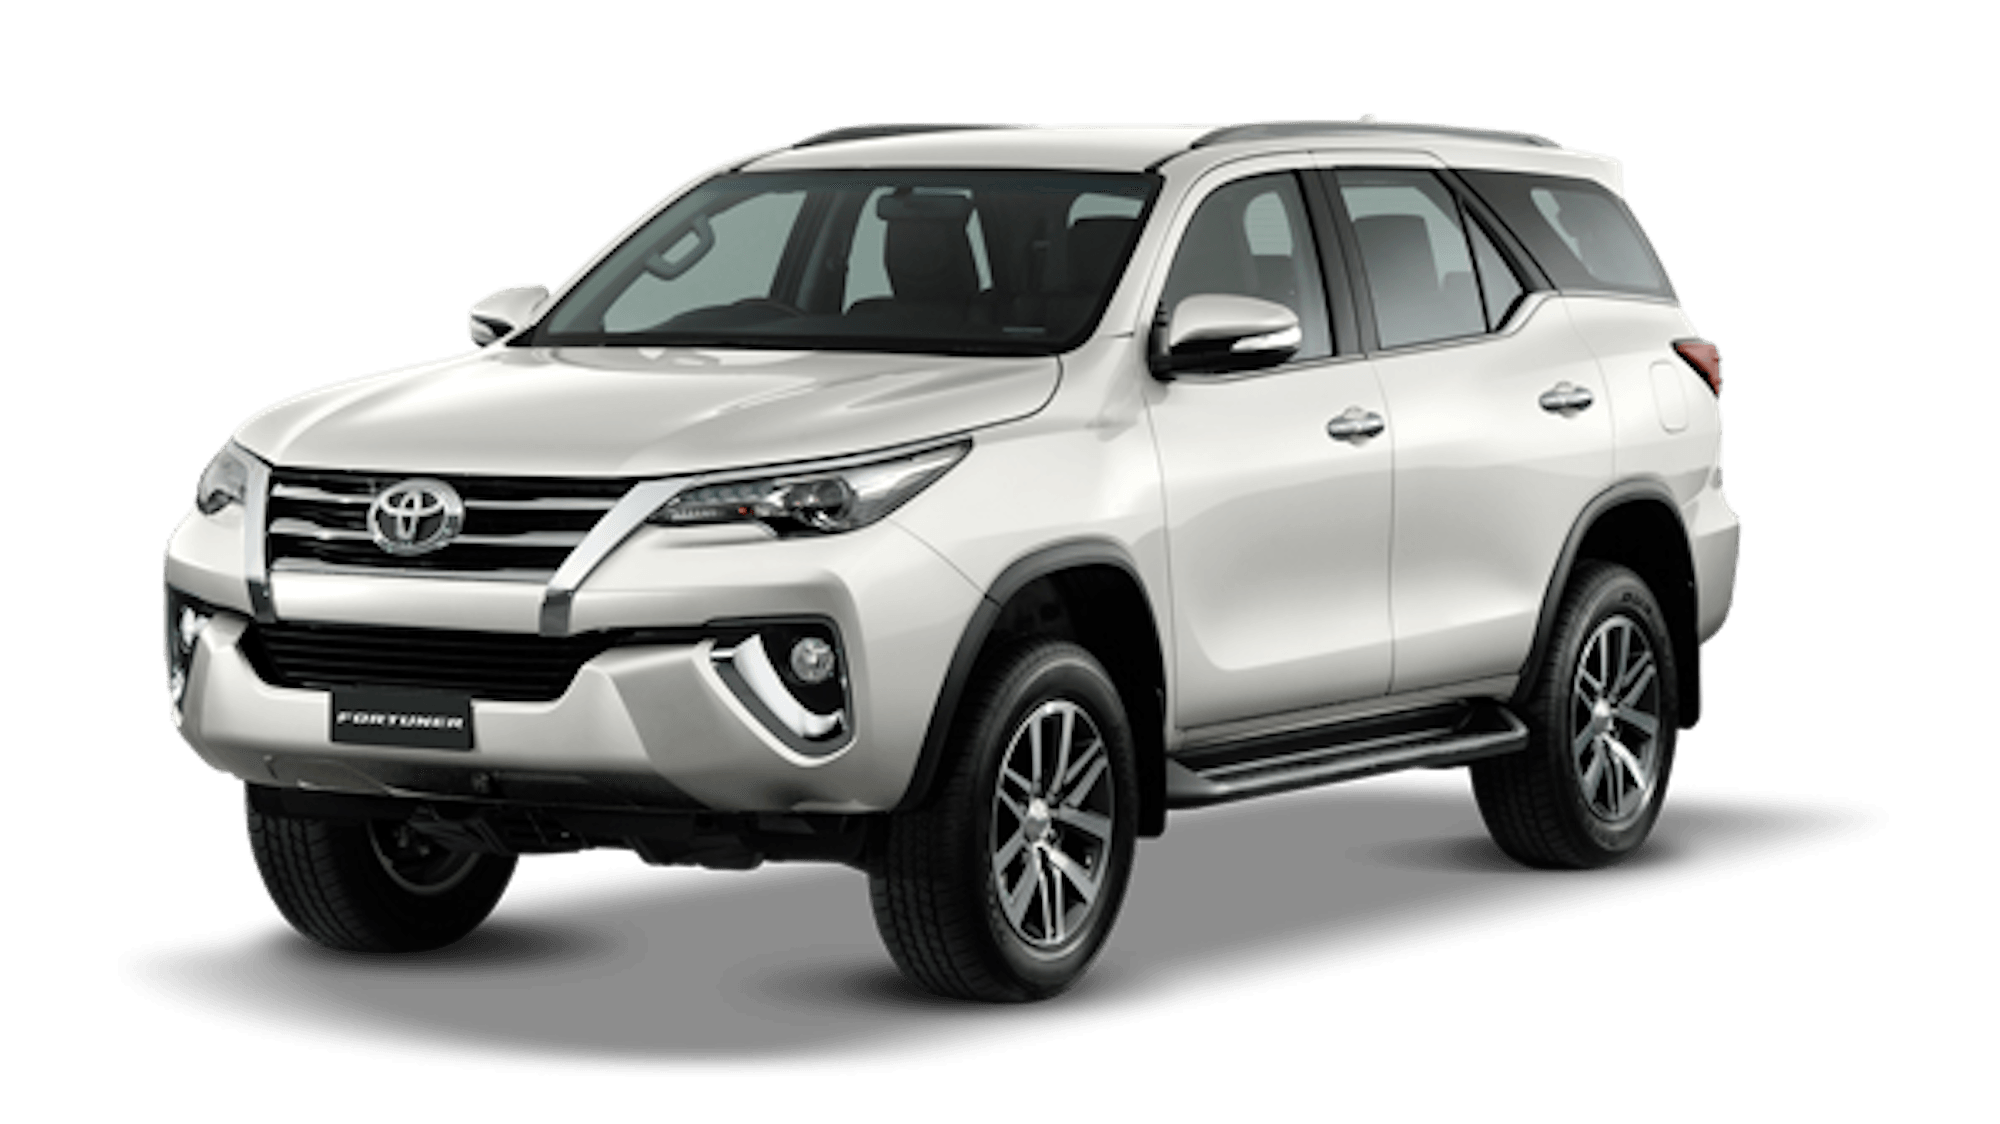 Find your best Toyota finance rate with Driva